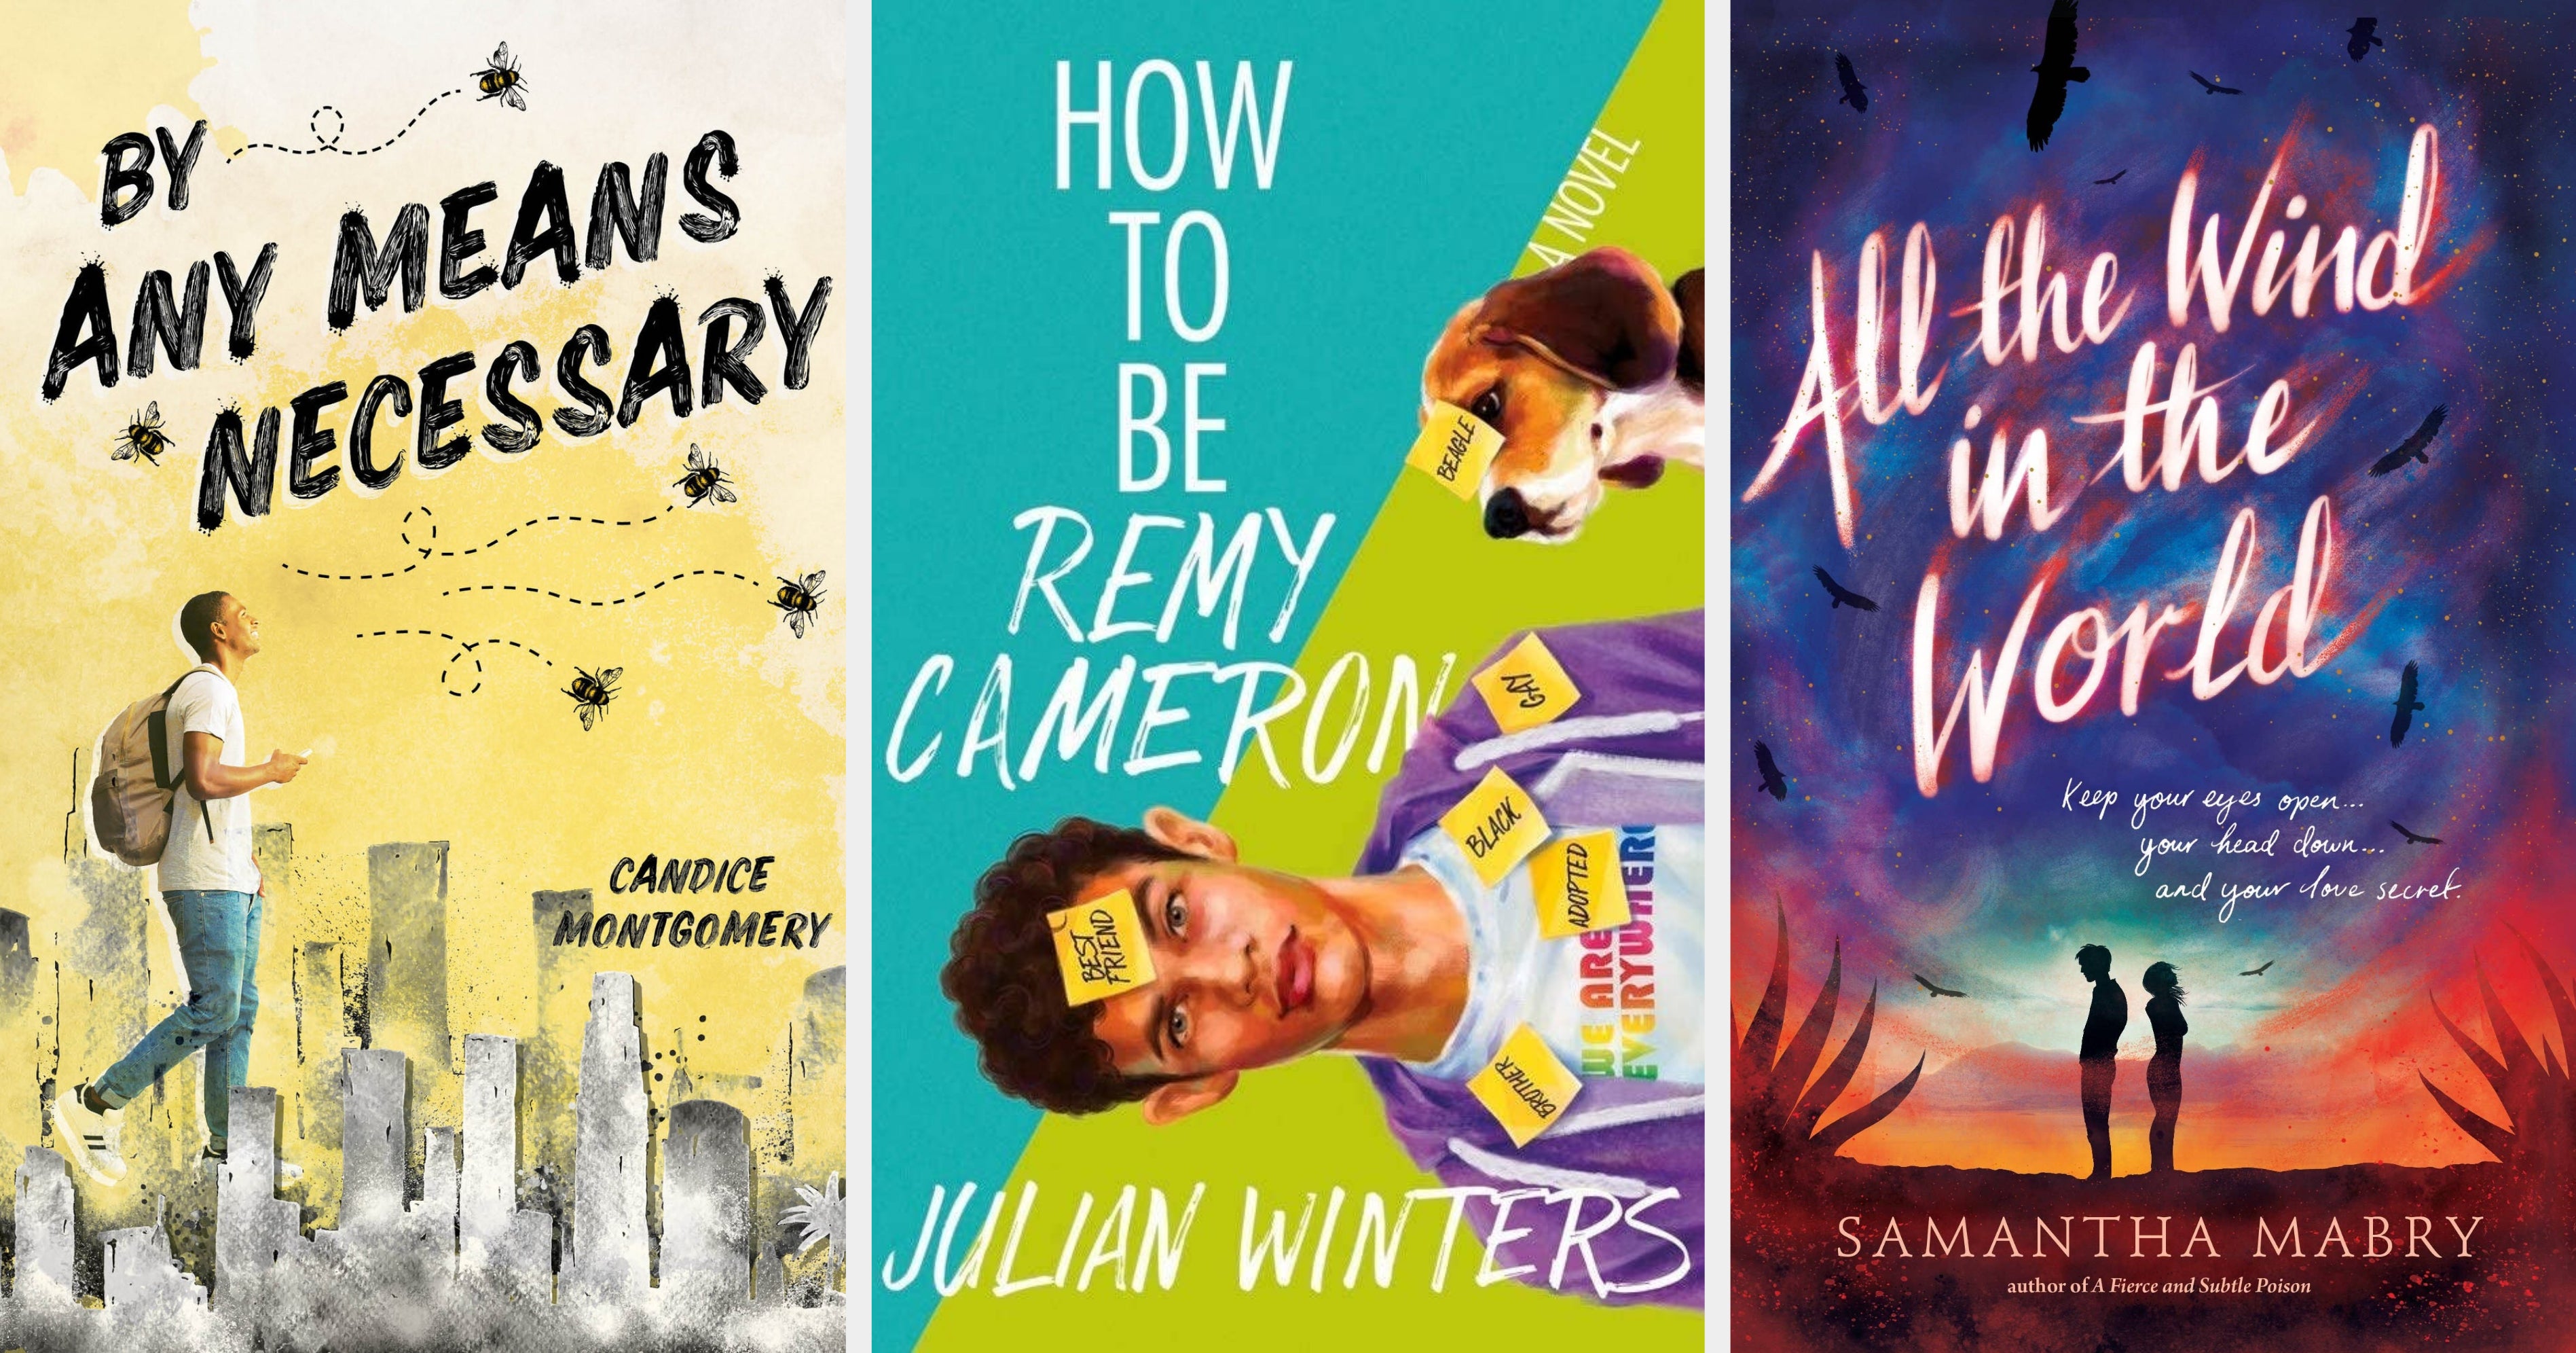 13 Spectacular Young Adult Books From Independent Publishers